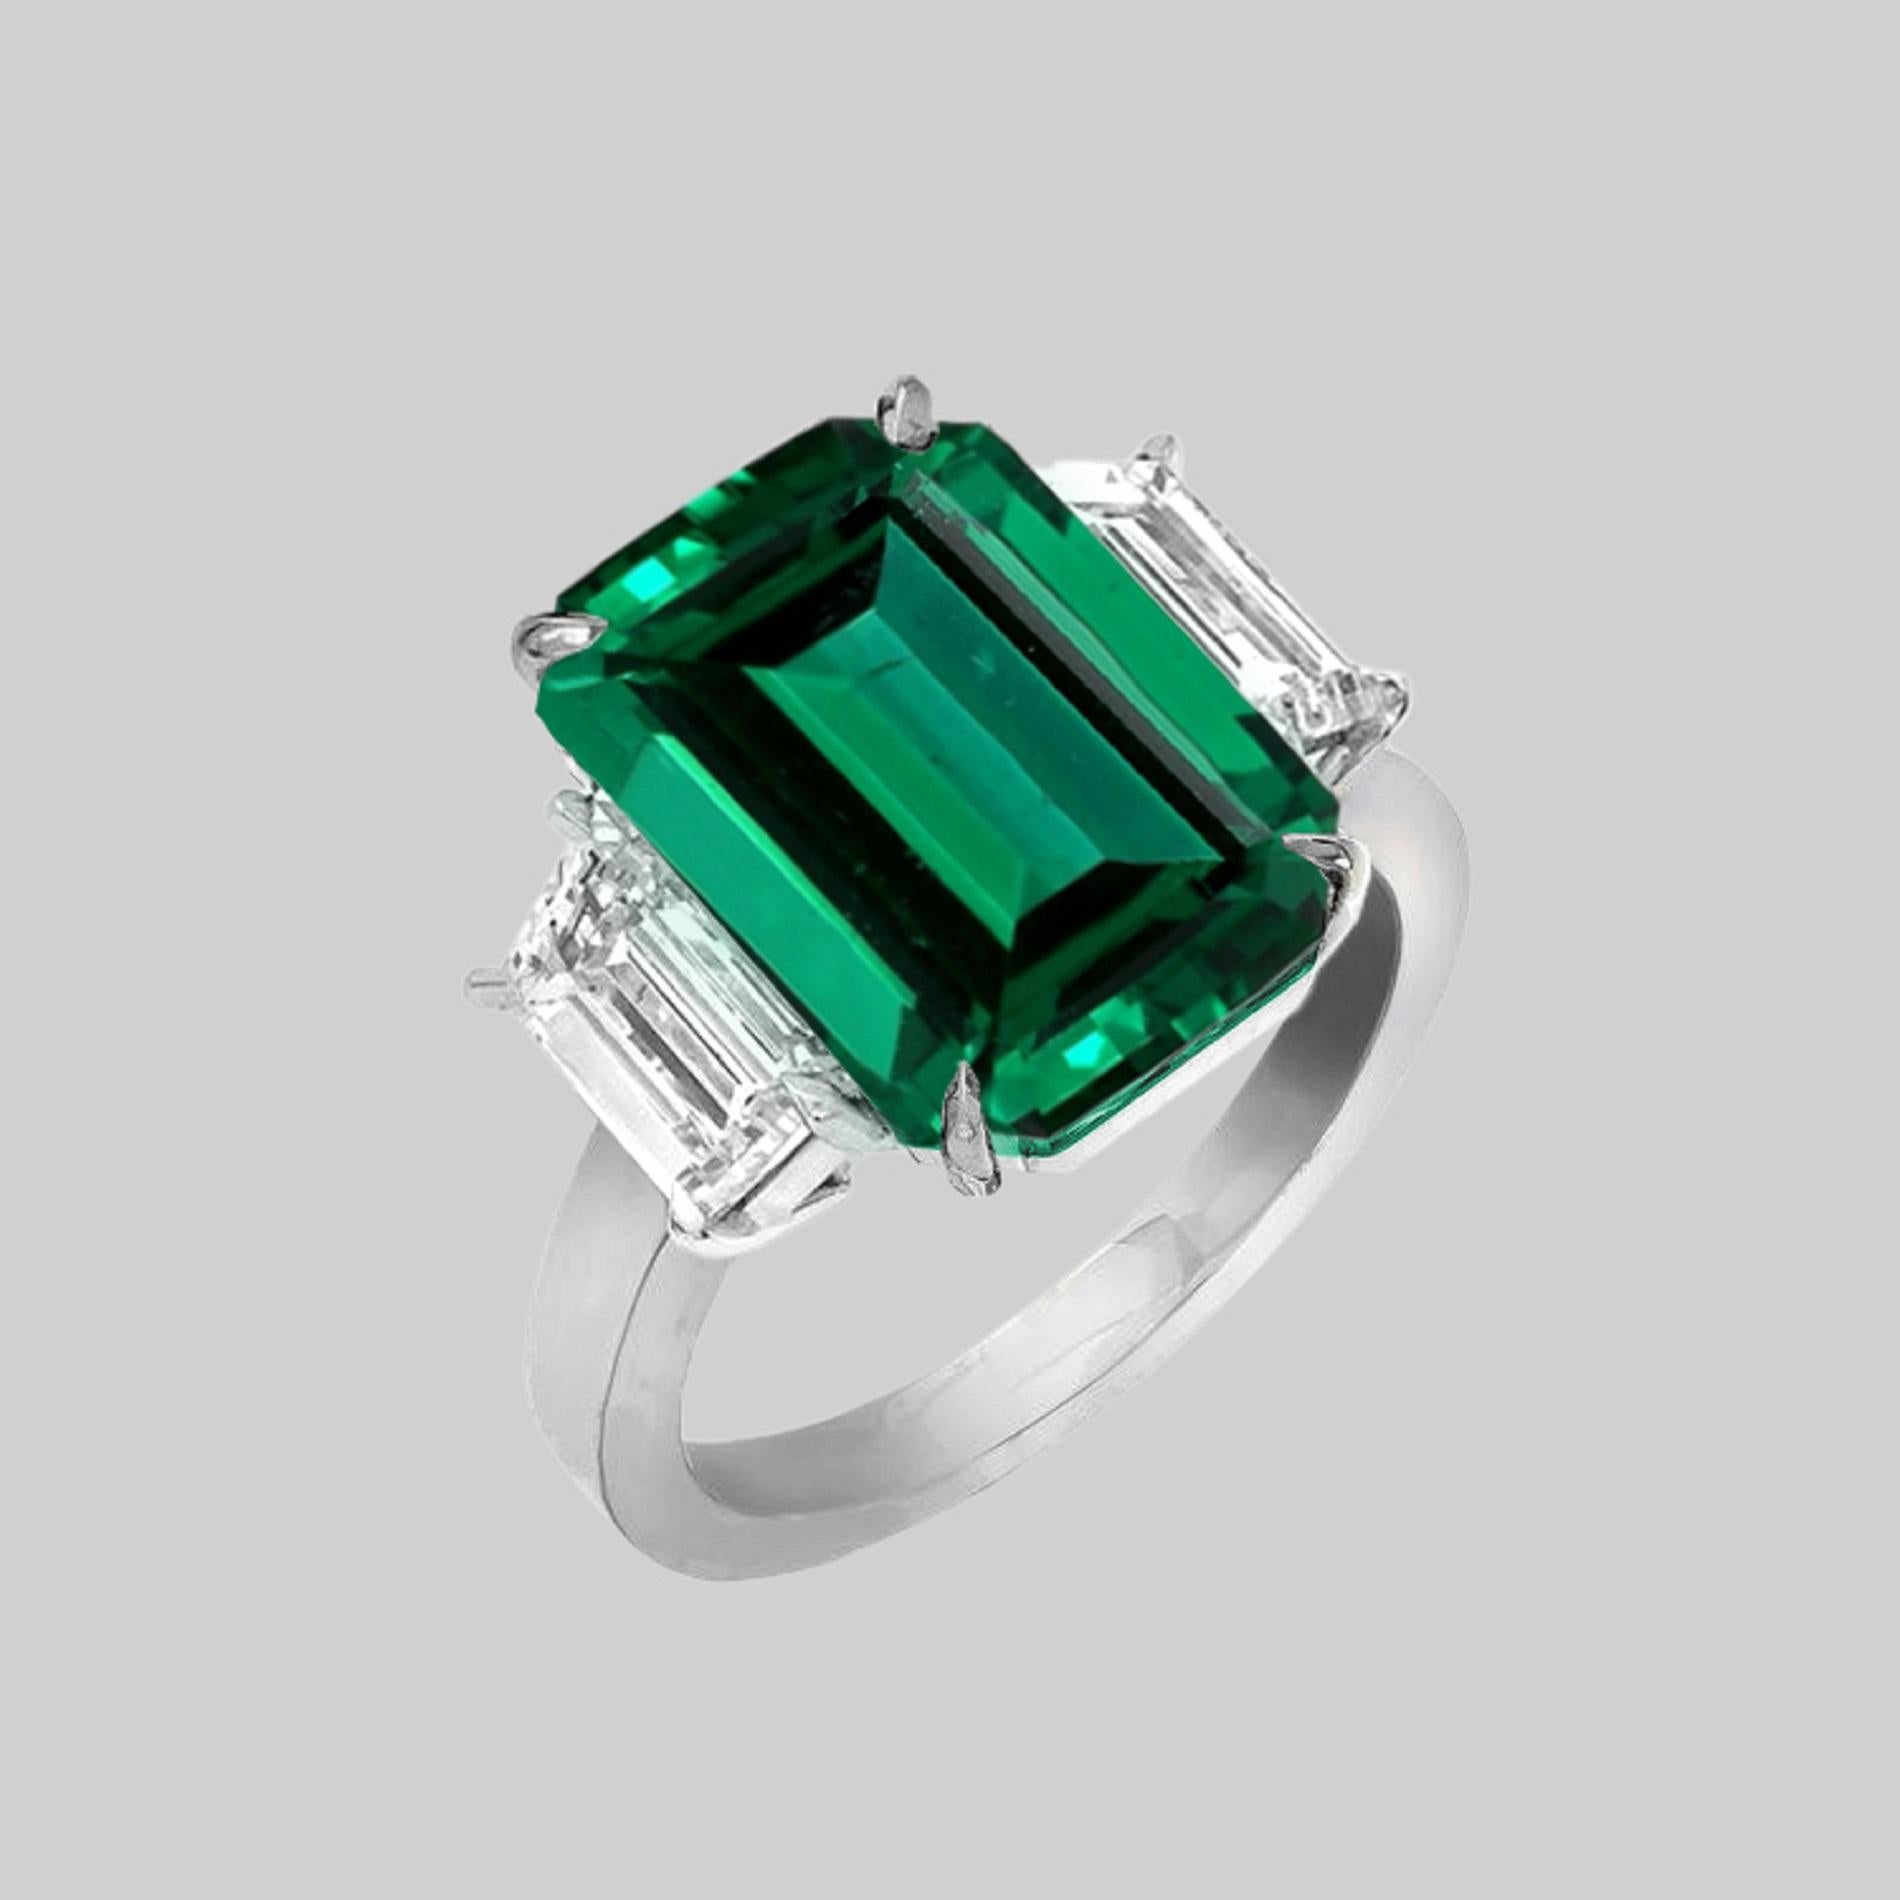 Emerald Cut Handmade in Italy GIA Certified 4 Carat Green Emerald Diamond Platinum Ring For Sale